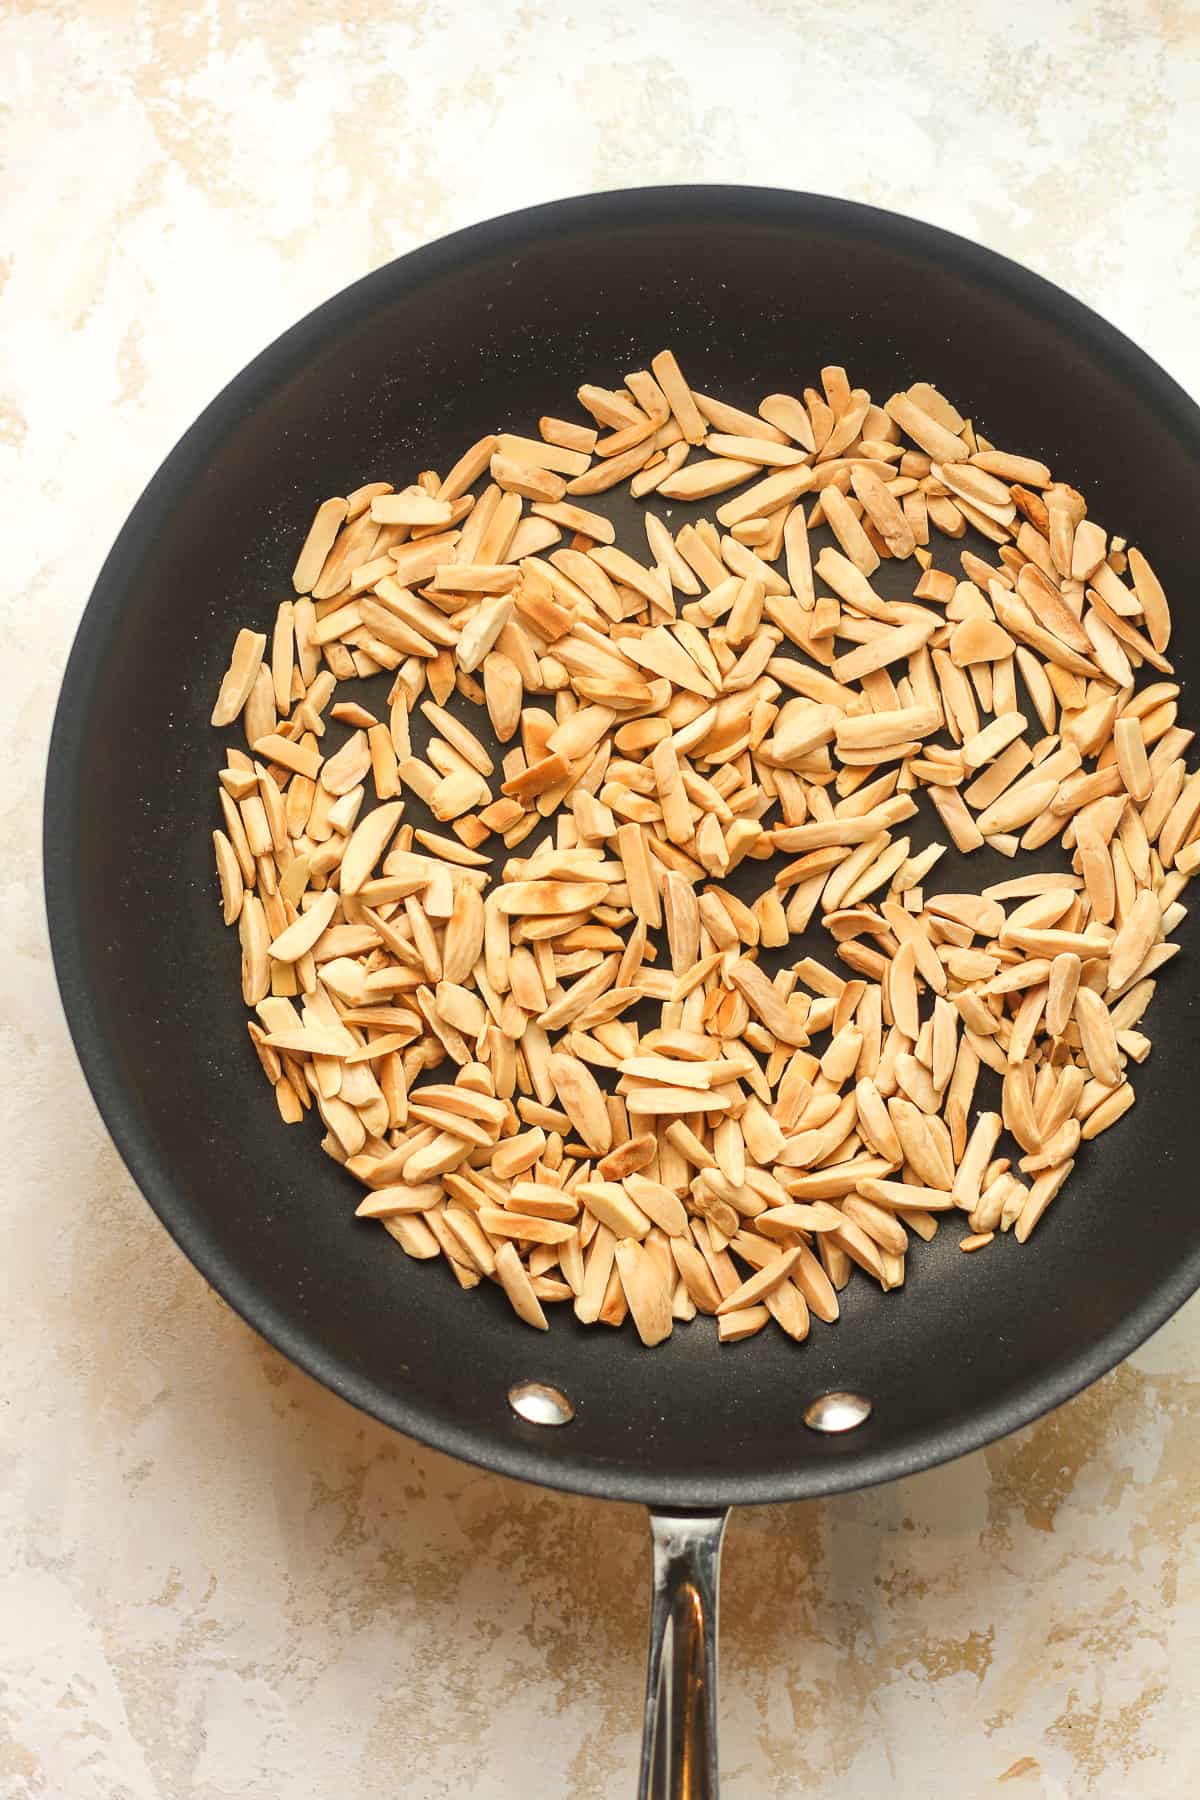 A pan of toasted almonds.